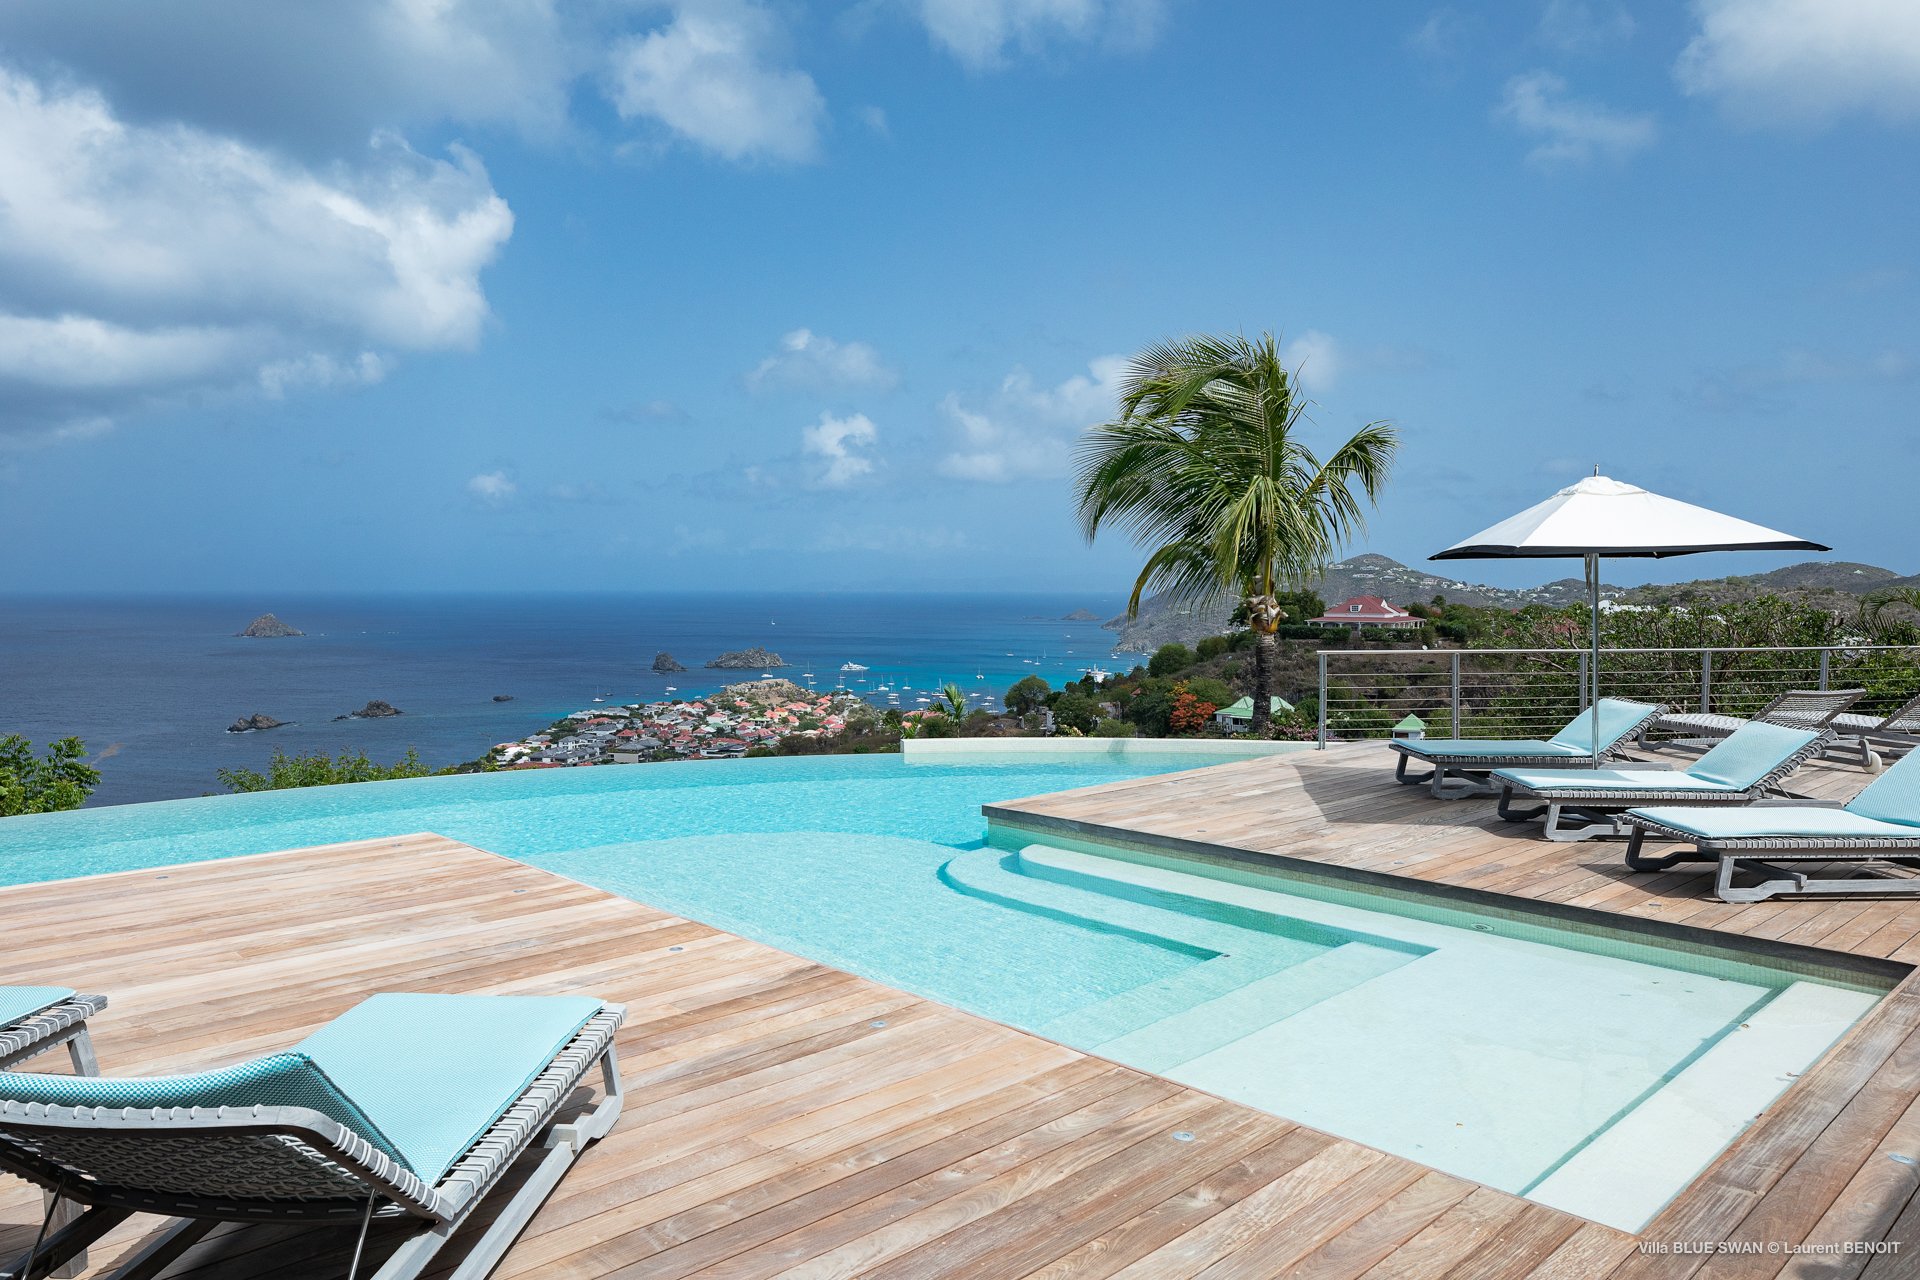 Nice pool, surrounded by a sun deck with 6 lounge chairs. Breathtaking view on the ocean and Gustavia.